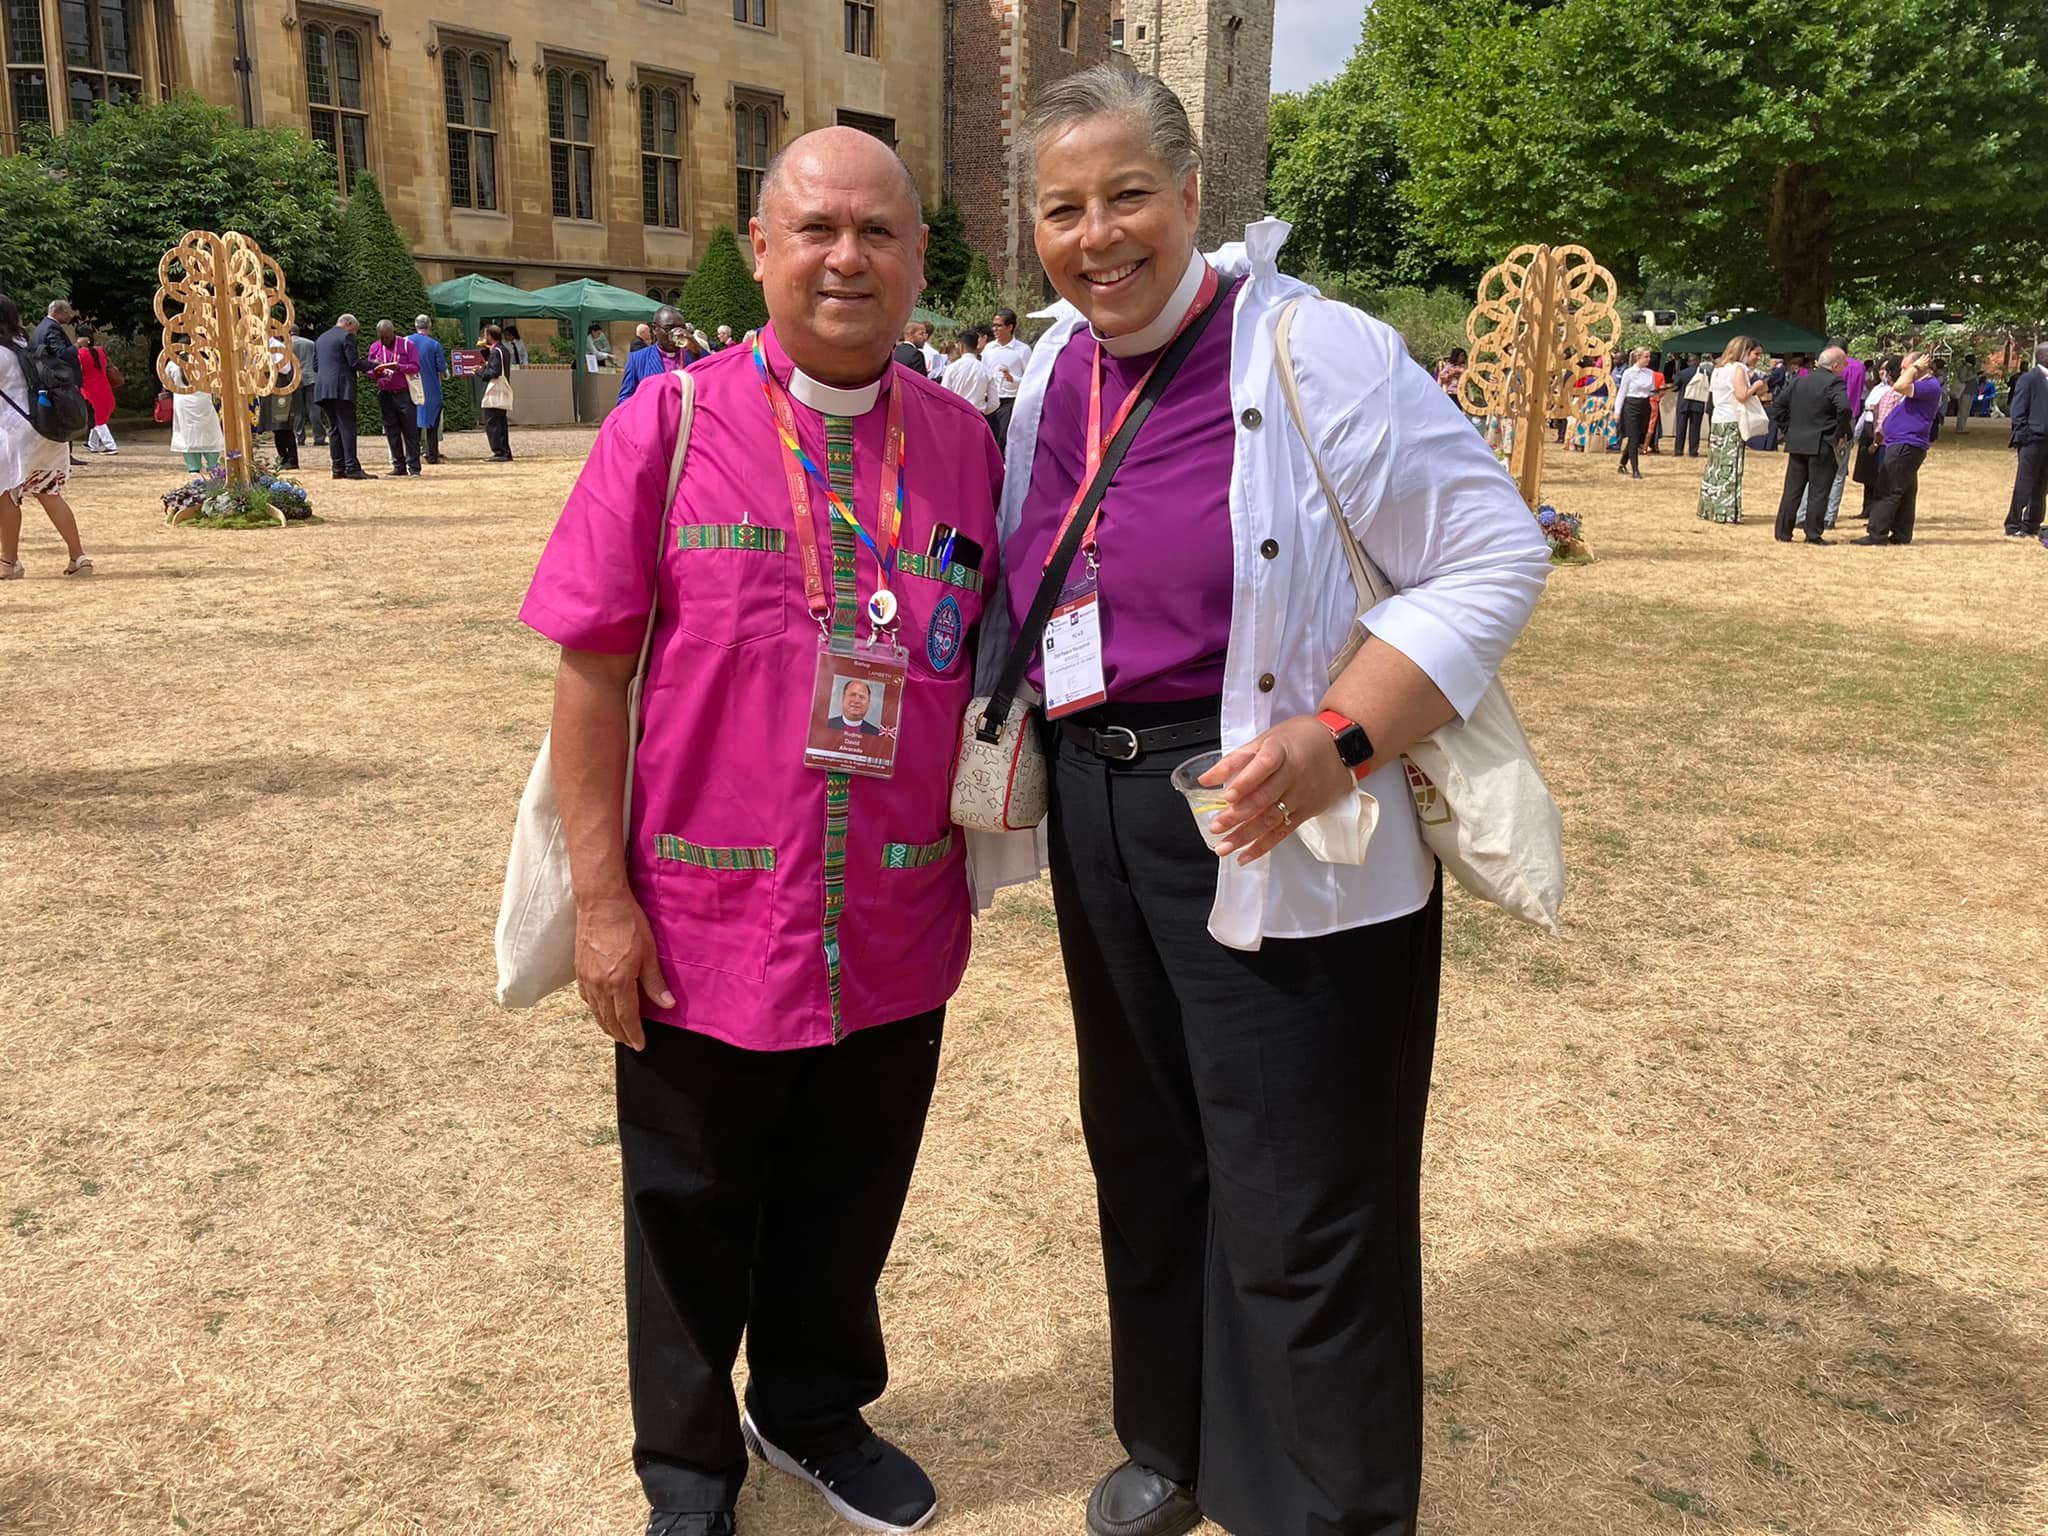 Day 8 - August 3. "After days of looking for him, I ran into Bishop Alvarado of El Salvador, at Lambeth Palace. Holy Trinity in West Orange has an active ministry in the Diocese of El Salvador." DAVID R. SMEDLEY PHOTO